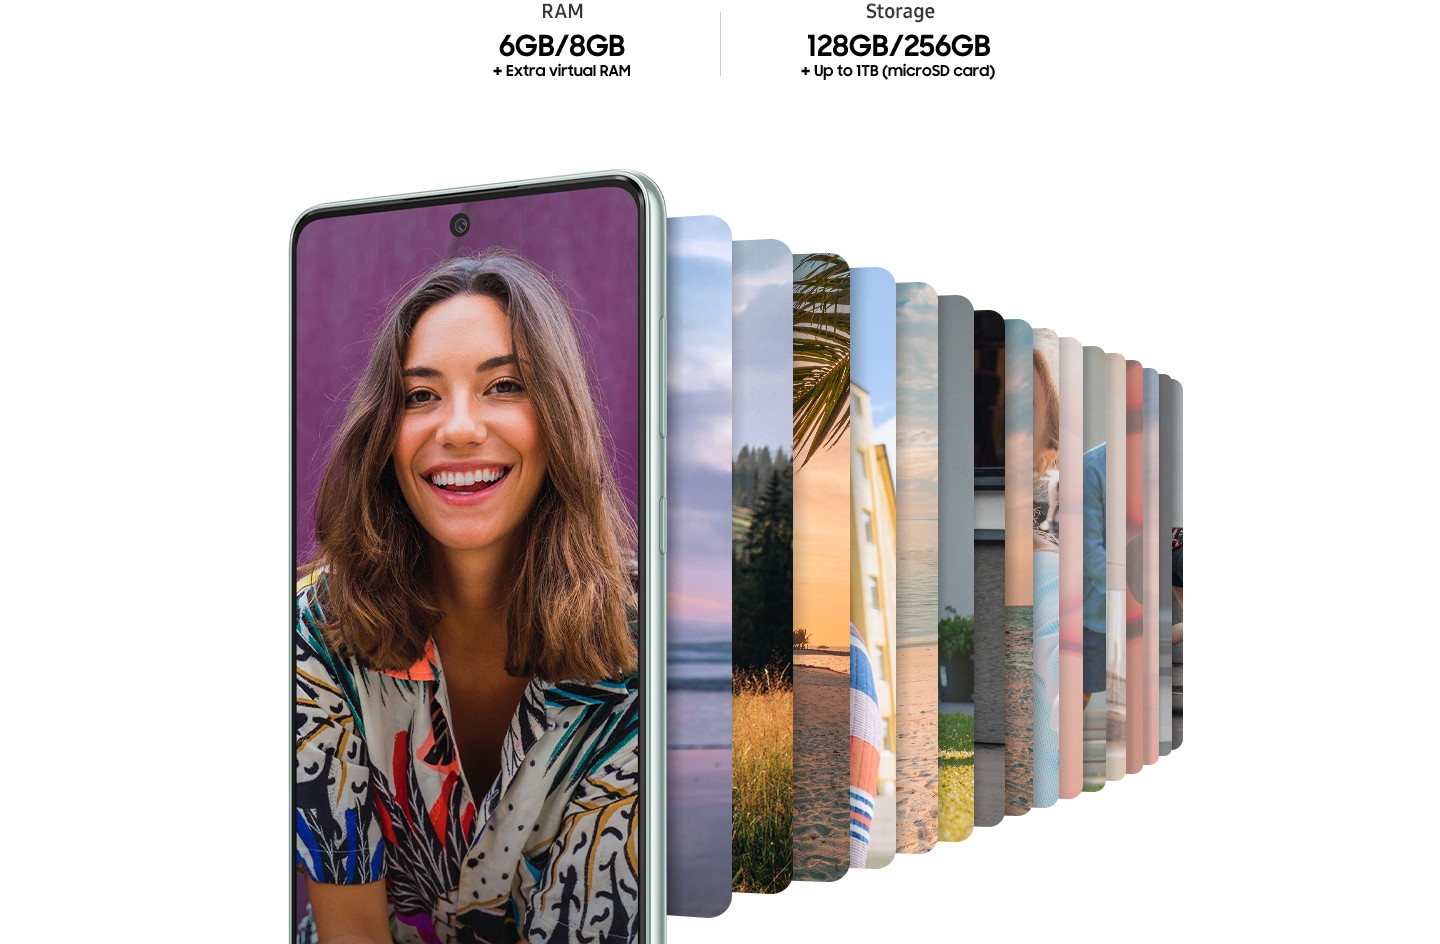 Galaxy A73 5G seen from the front, displaying an image of a woman smiling. Behind the smartphone are numerous pictures in the smartphone shape, lined up and showing various landscape environments. Text reads RAM 6G/8GB +Extra virtual RAM and Storage 128/256GB +Up to 1TB (micro SD card).